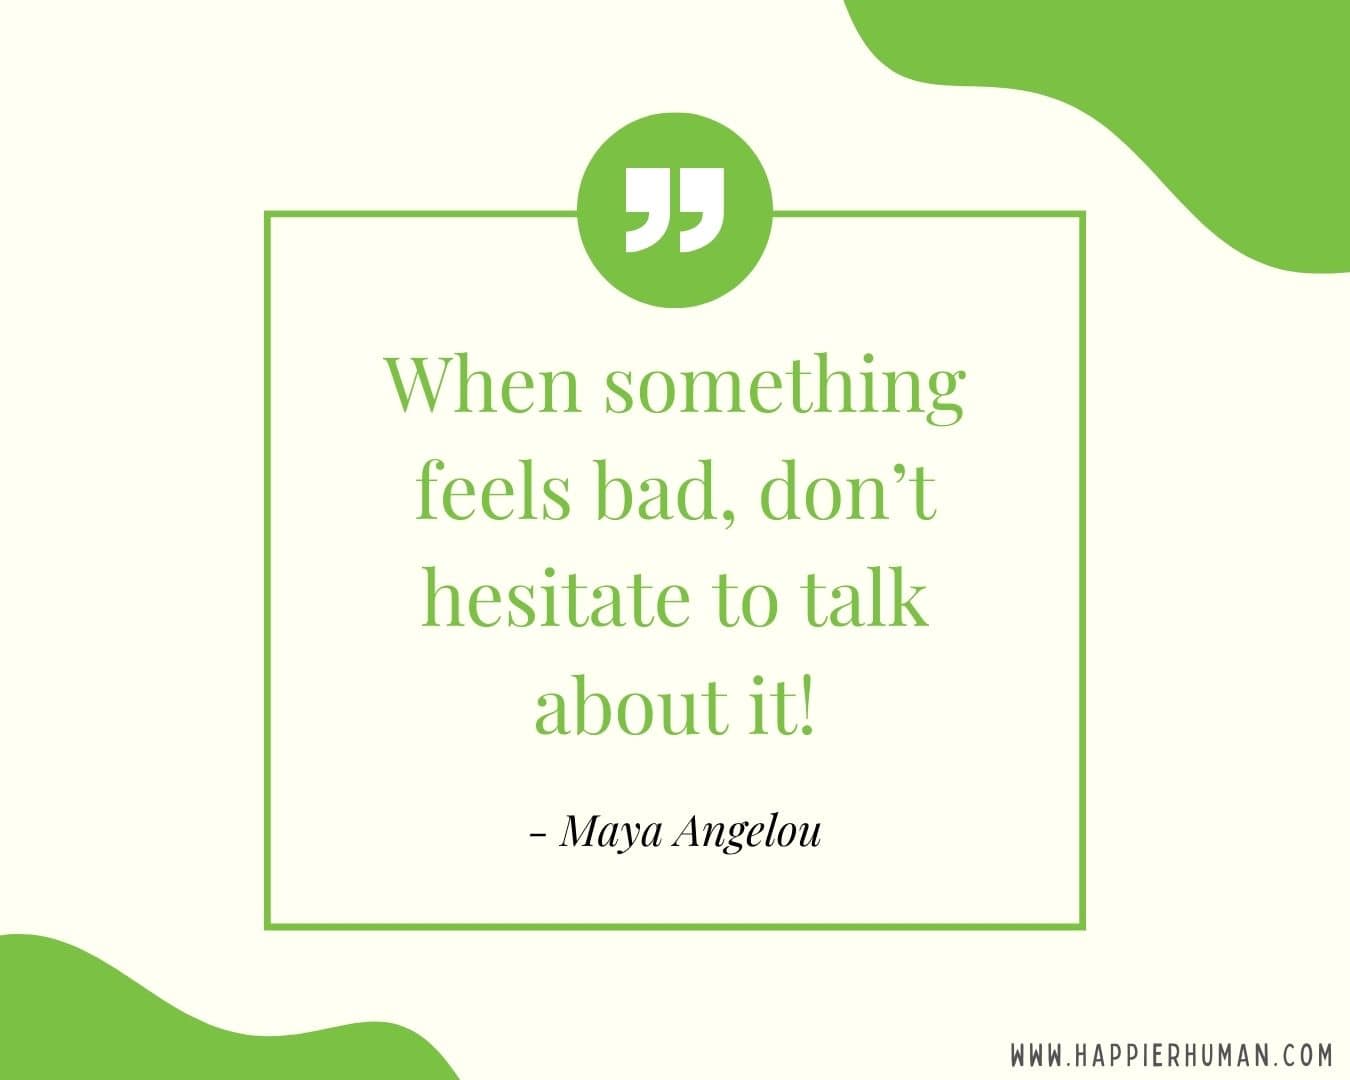 I’m Here for You Quotes - “When something feels bad, don’t hesitate to talk about it!” – Maya Angelou